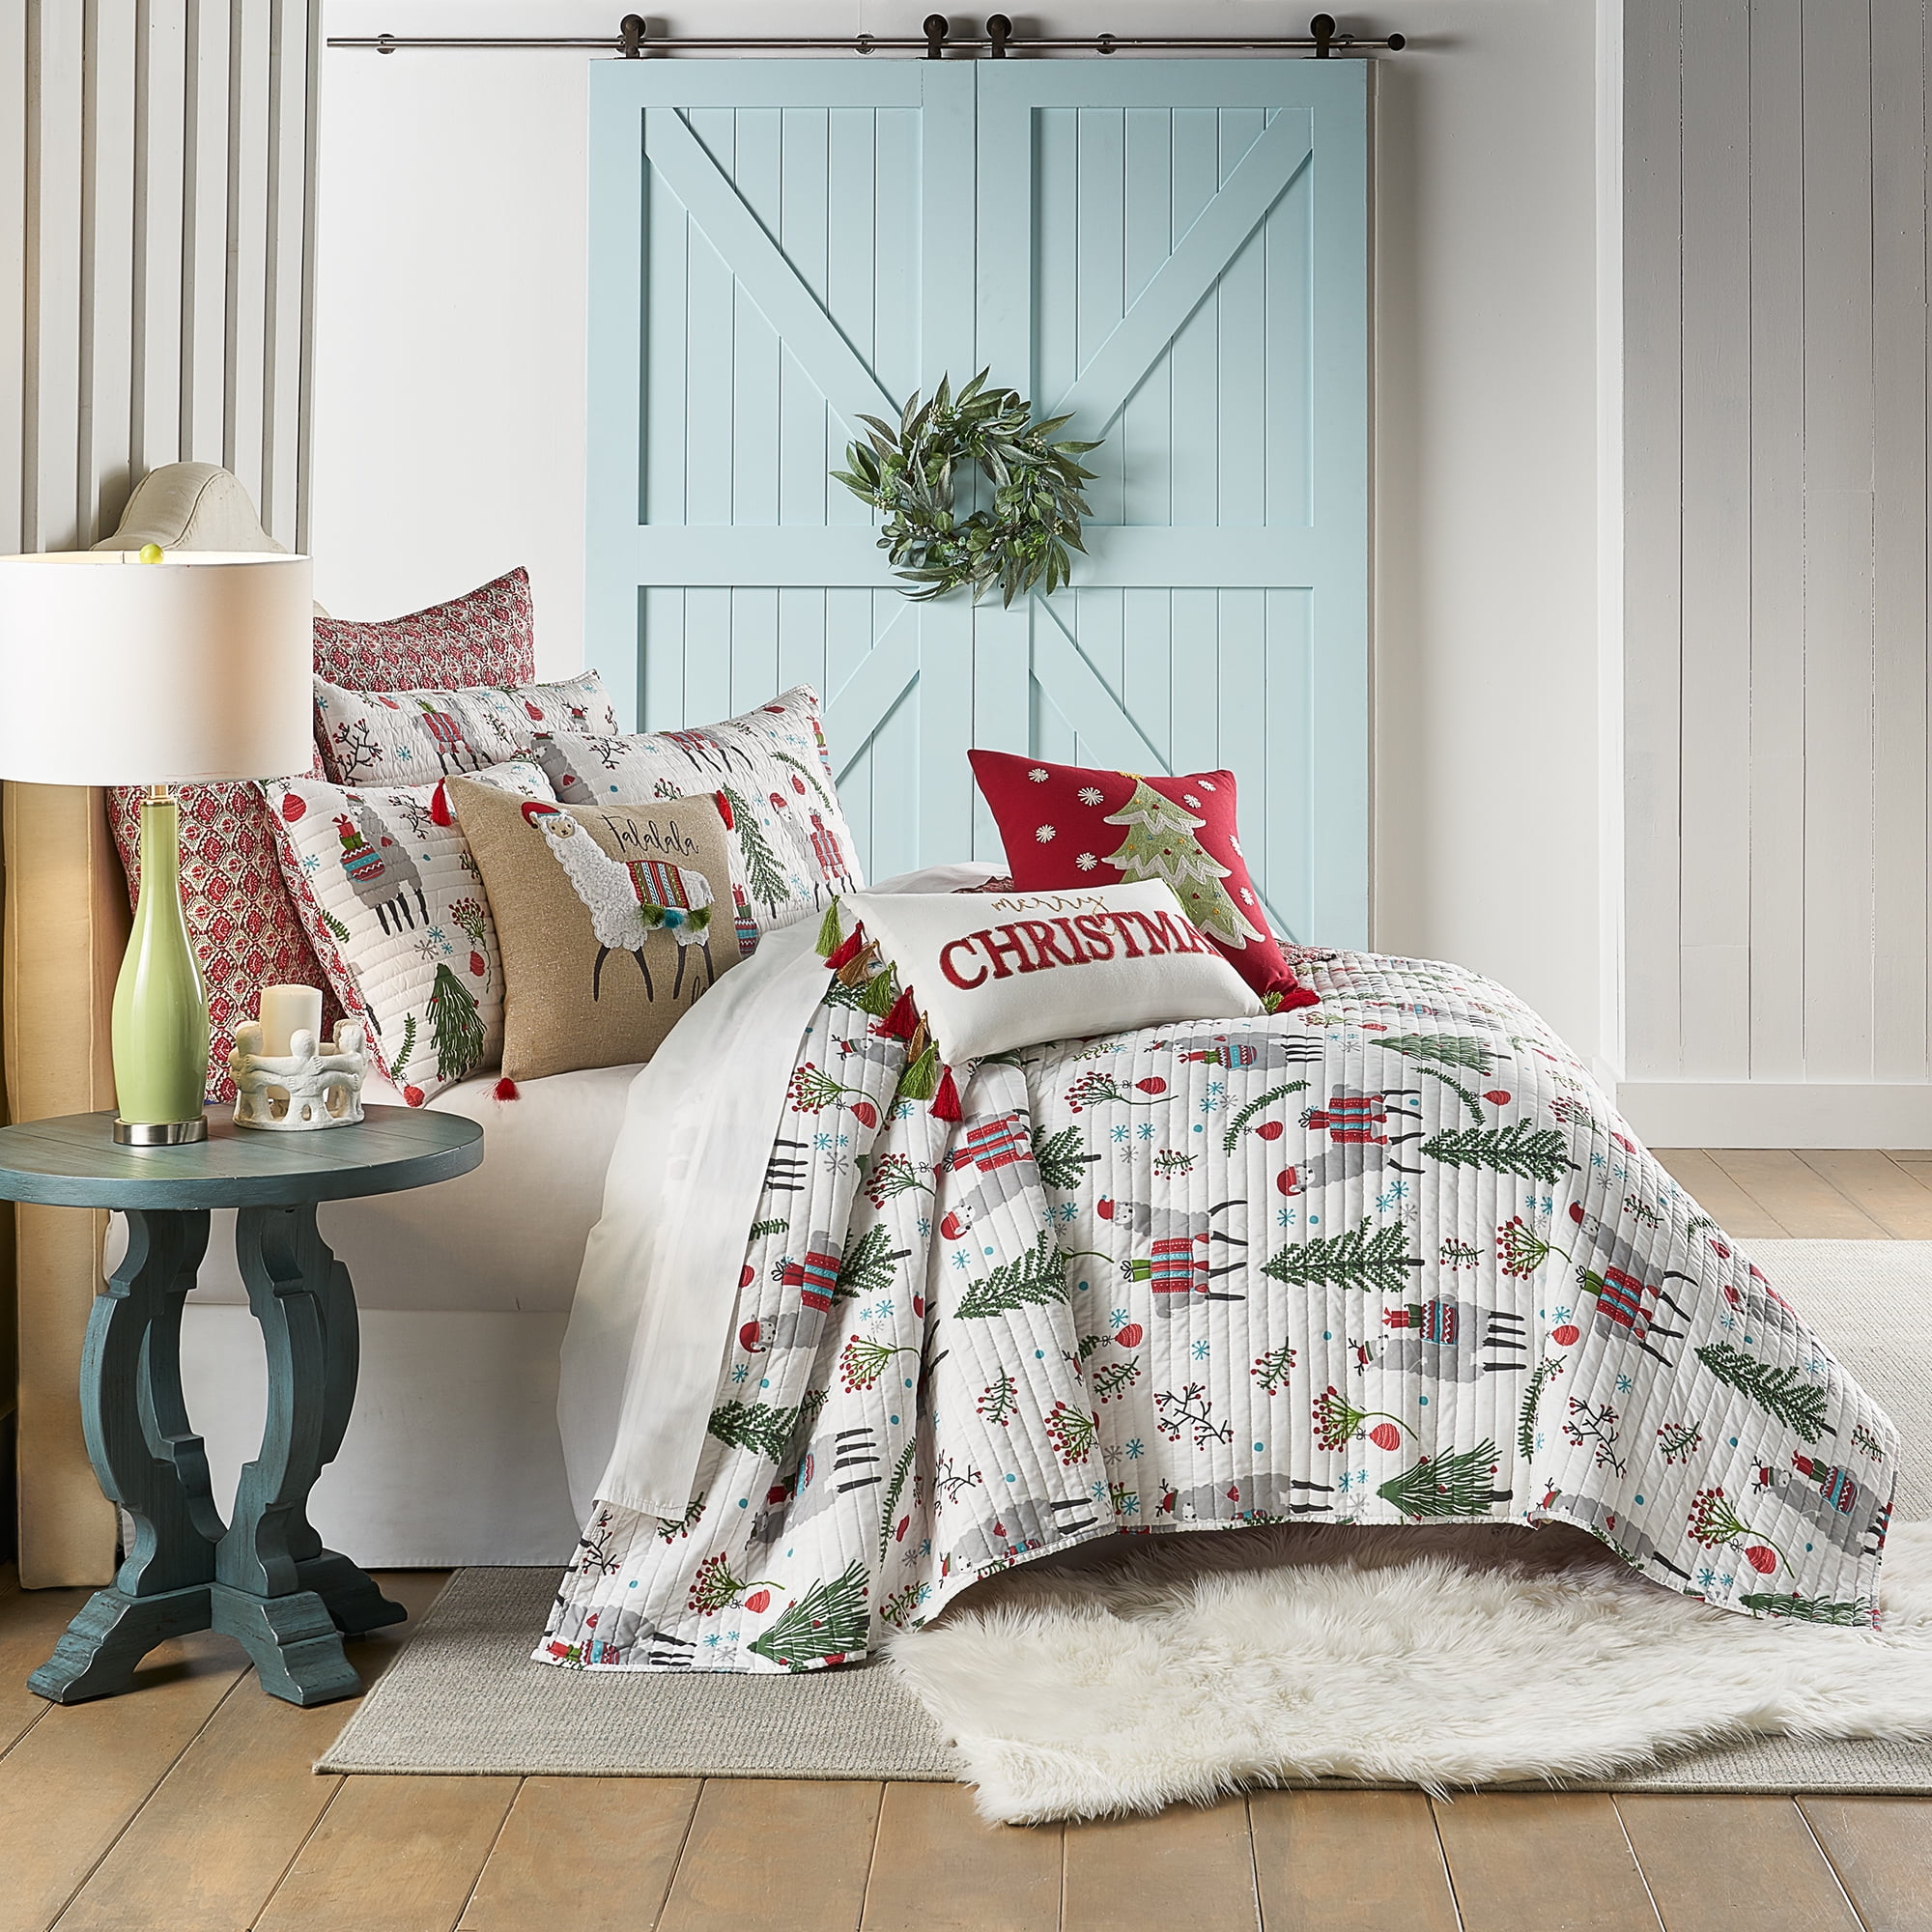 Merry & Bright by Levtex Home - Fa La La Llama Quilt Set - King Quilt  (106x92in.) + Two King Pillow Sham (20x36in.) - Red, Green, Grey, Blue, and  White - Reversible - Polyester Blend | Longblazer